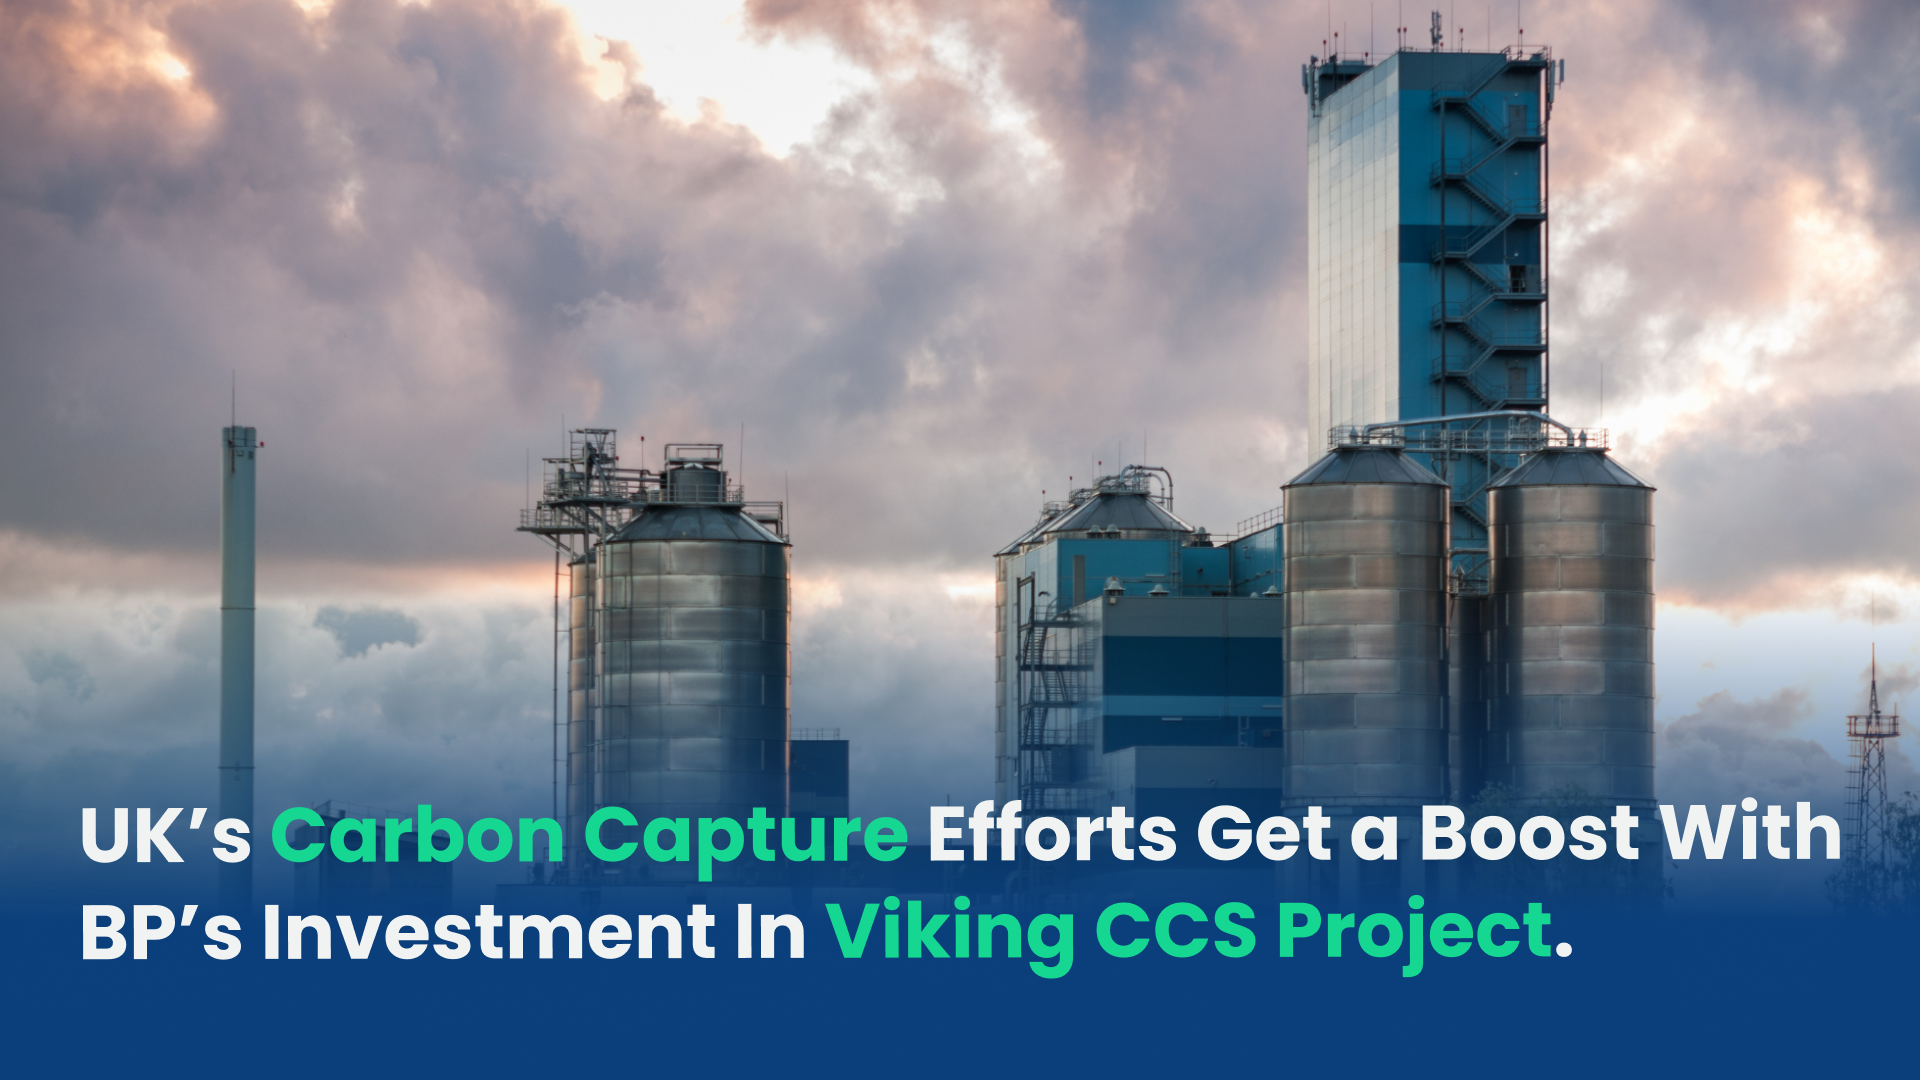 UK’s Carbon Capture Efforts Get a Boost With BP’s Investment In Viking CCS Project.